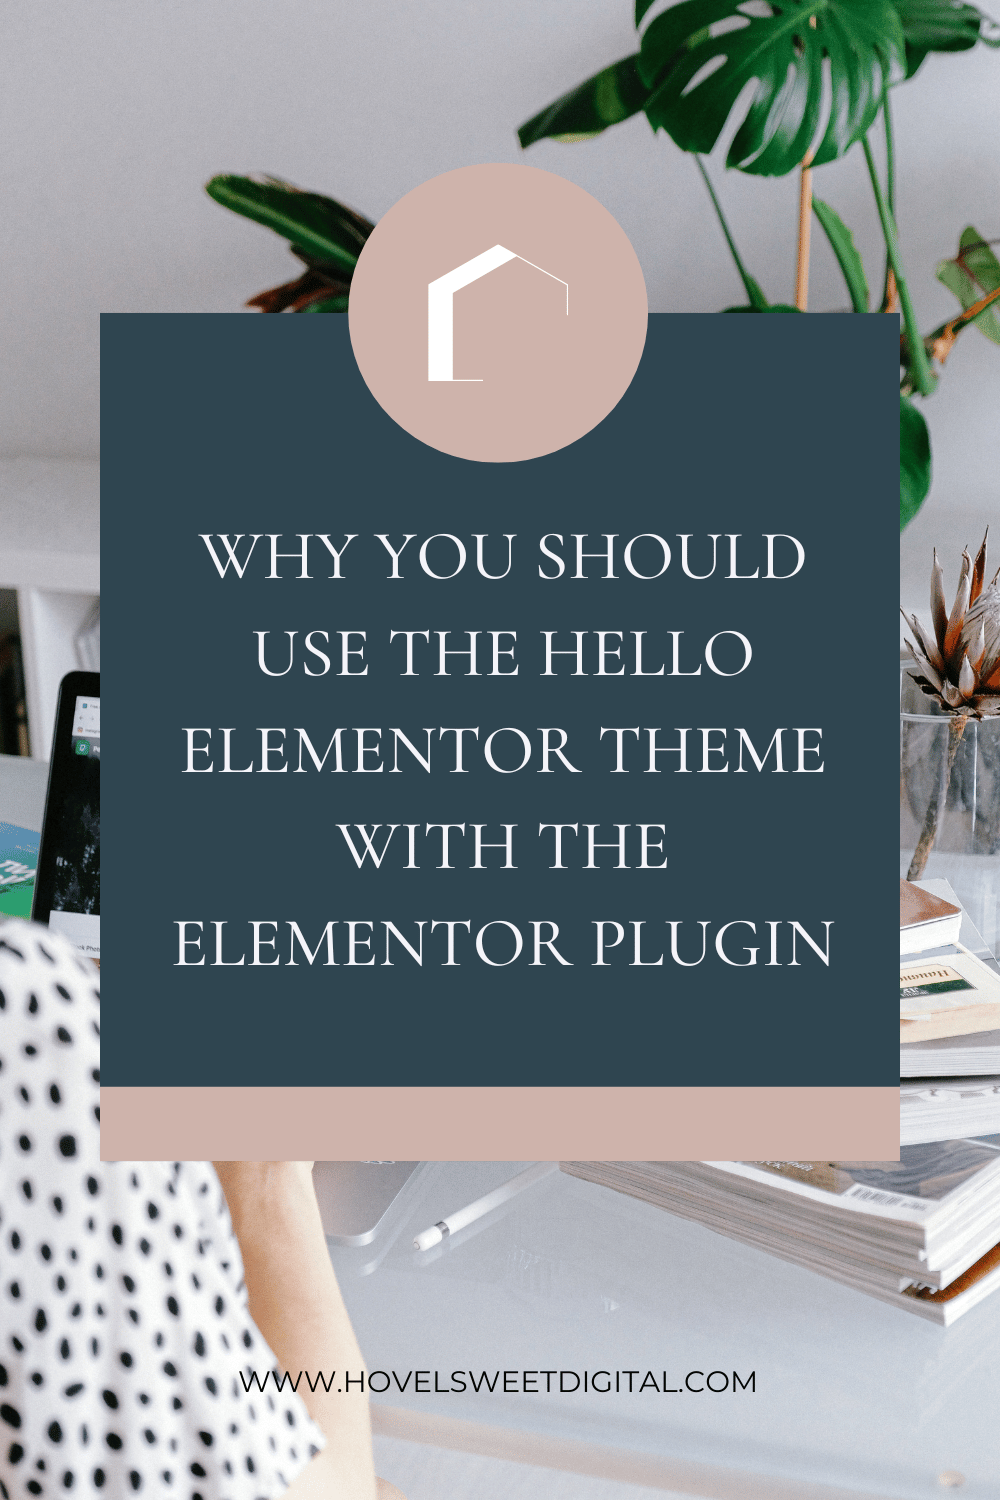 Why You Should Use the Hello Elementor Theme With the Elementor Plugin